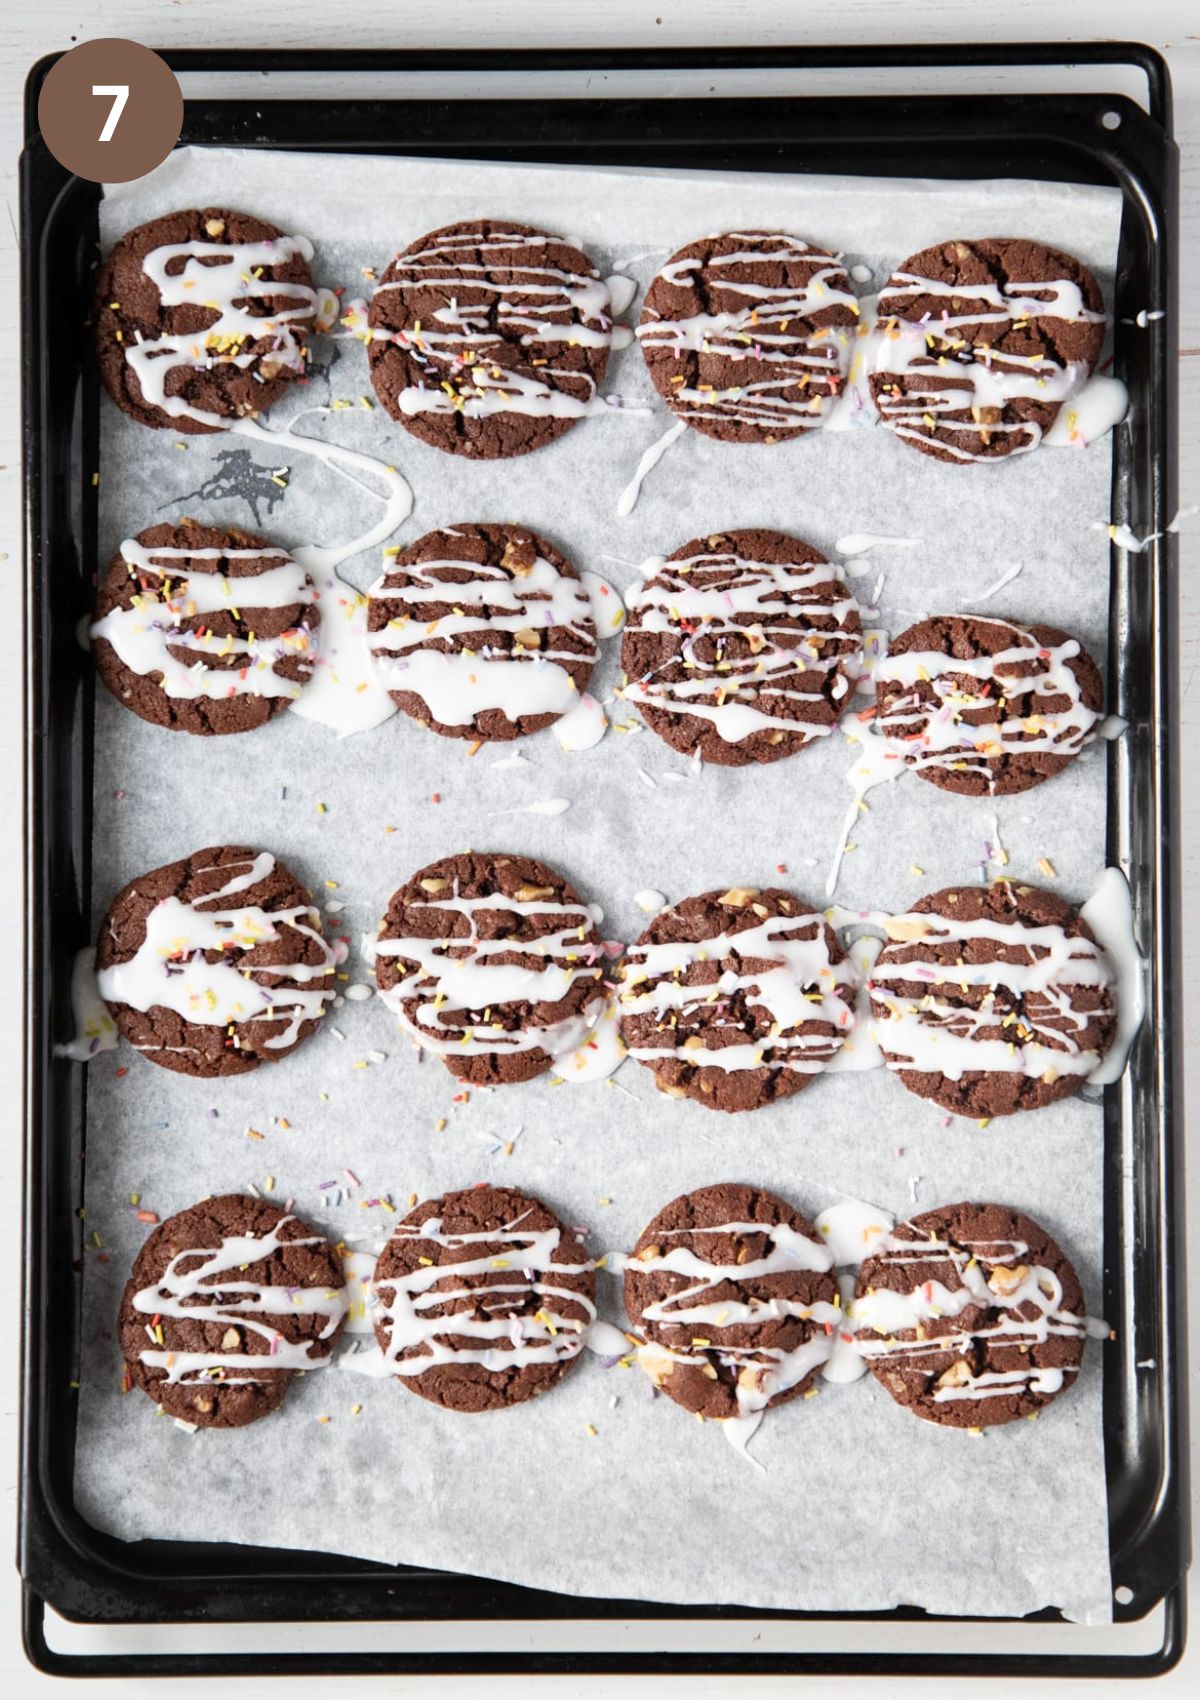 many cookies on a baking sheet drizzled with glaze and sprinkled with sprinkles.